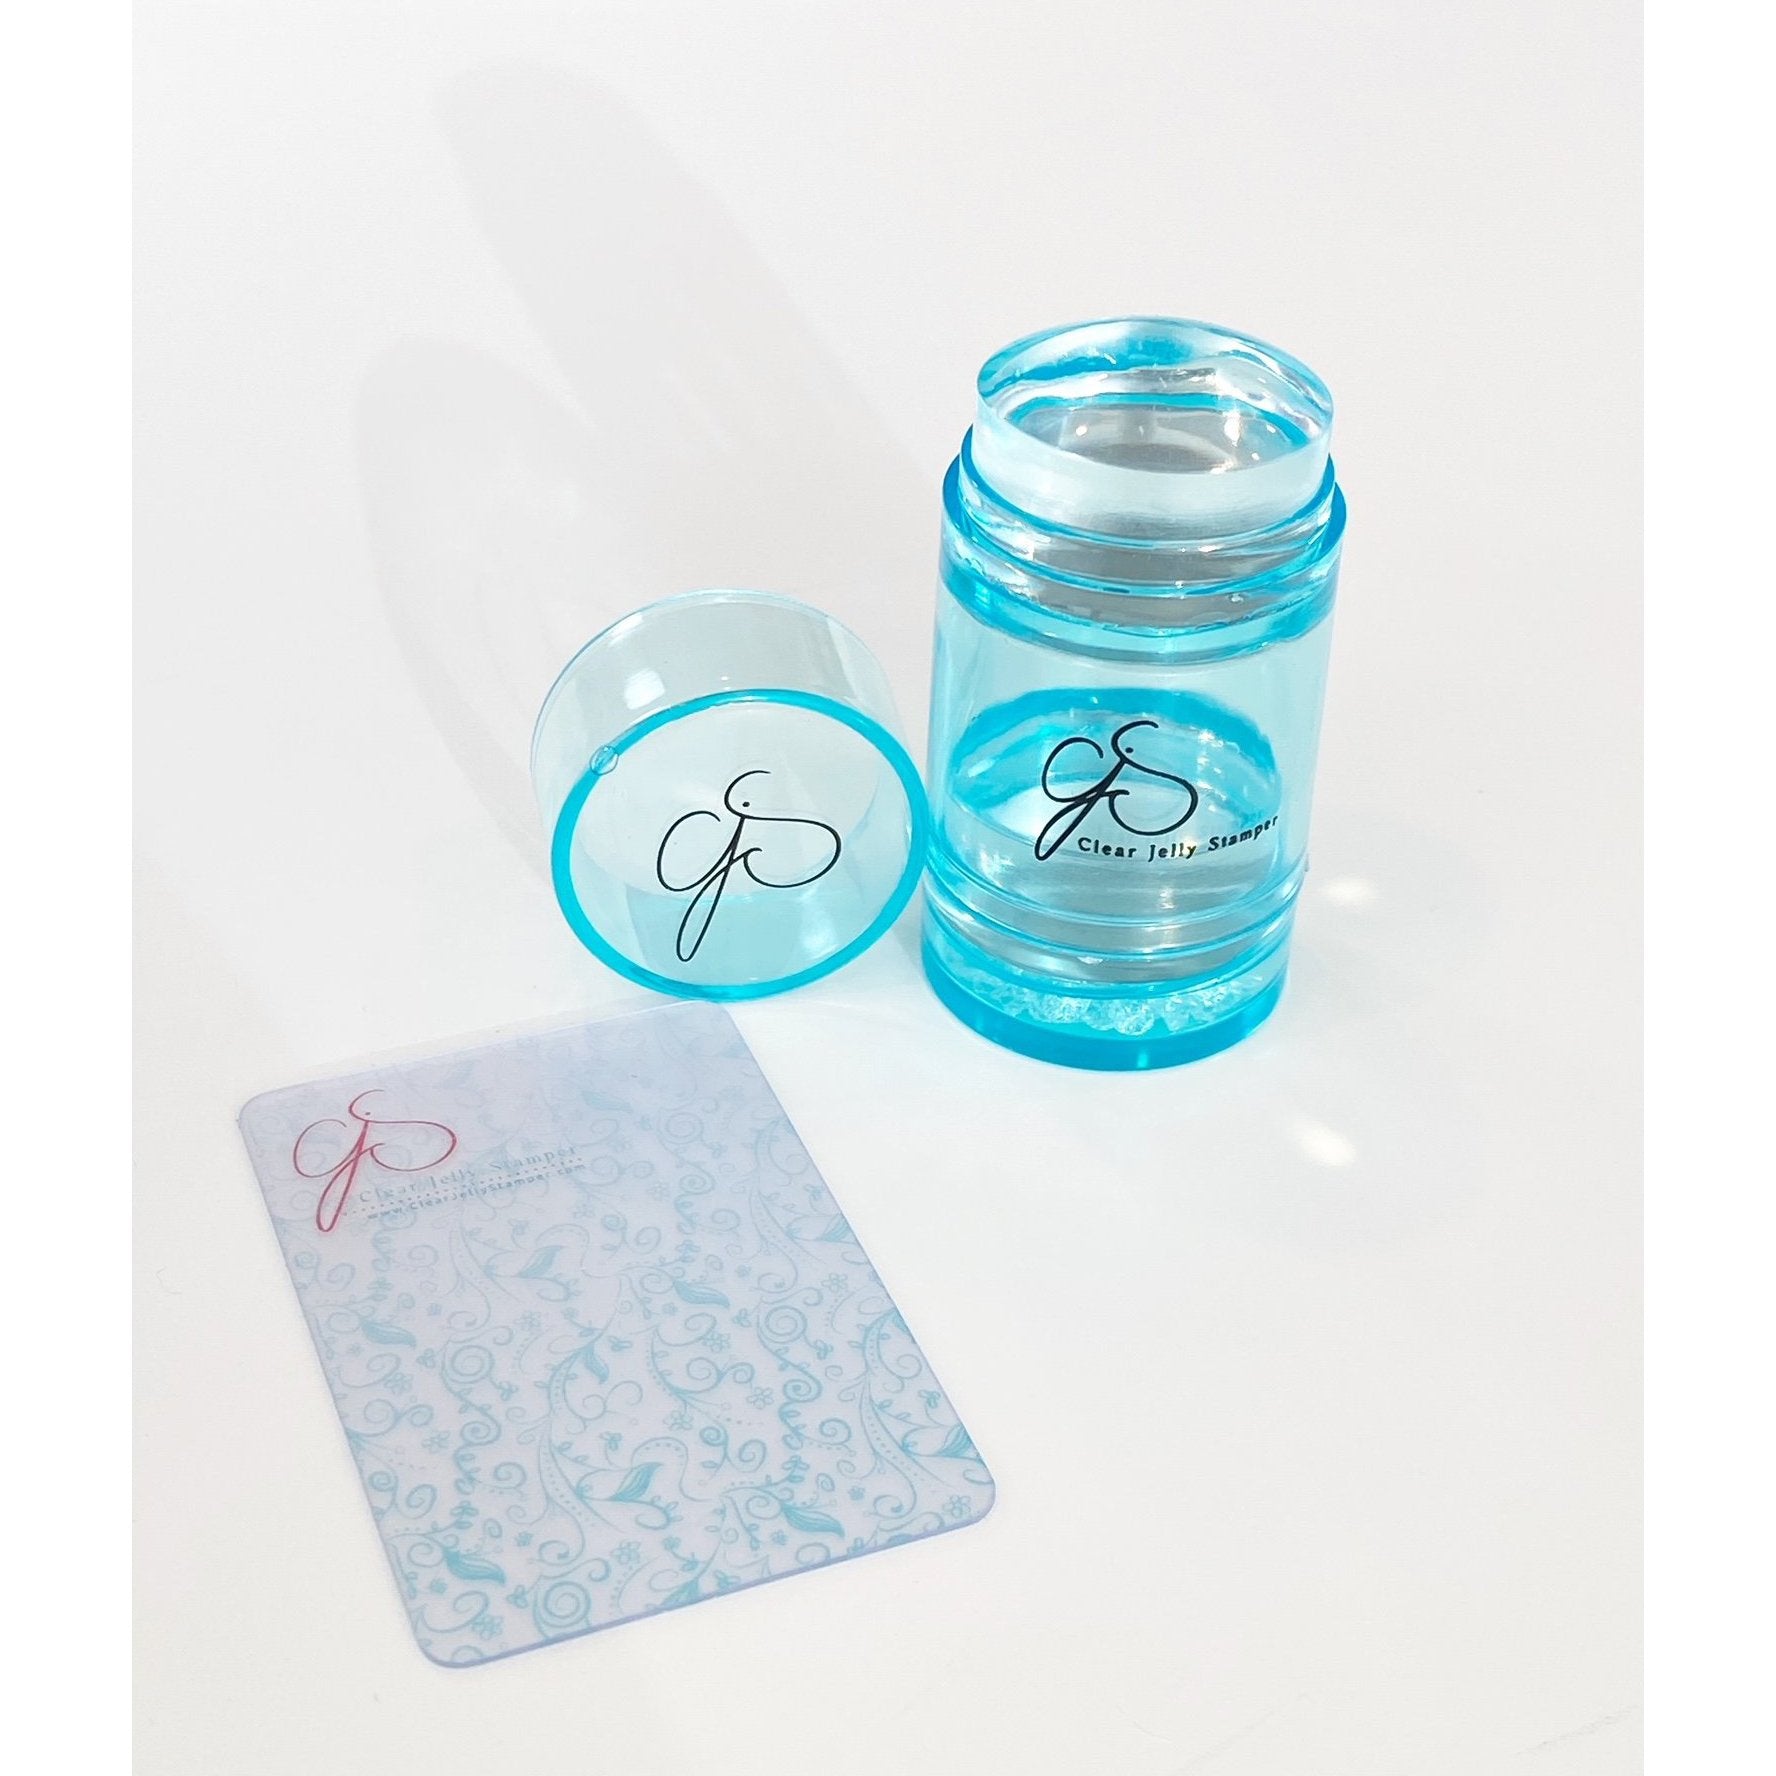 Clear Jelly Stamper - Lil' Bling Stamper Set - Creata Beauty - Professional Beauty Products